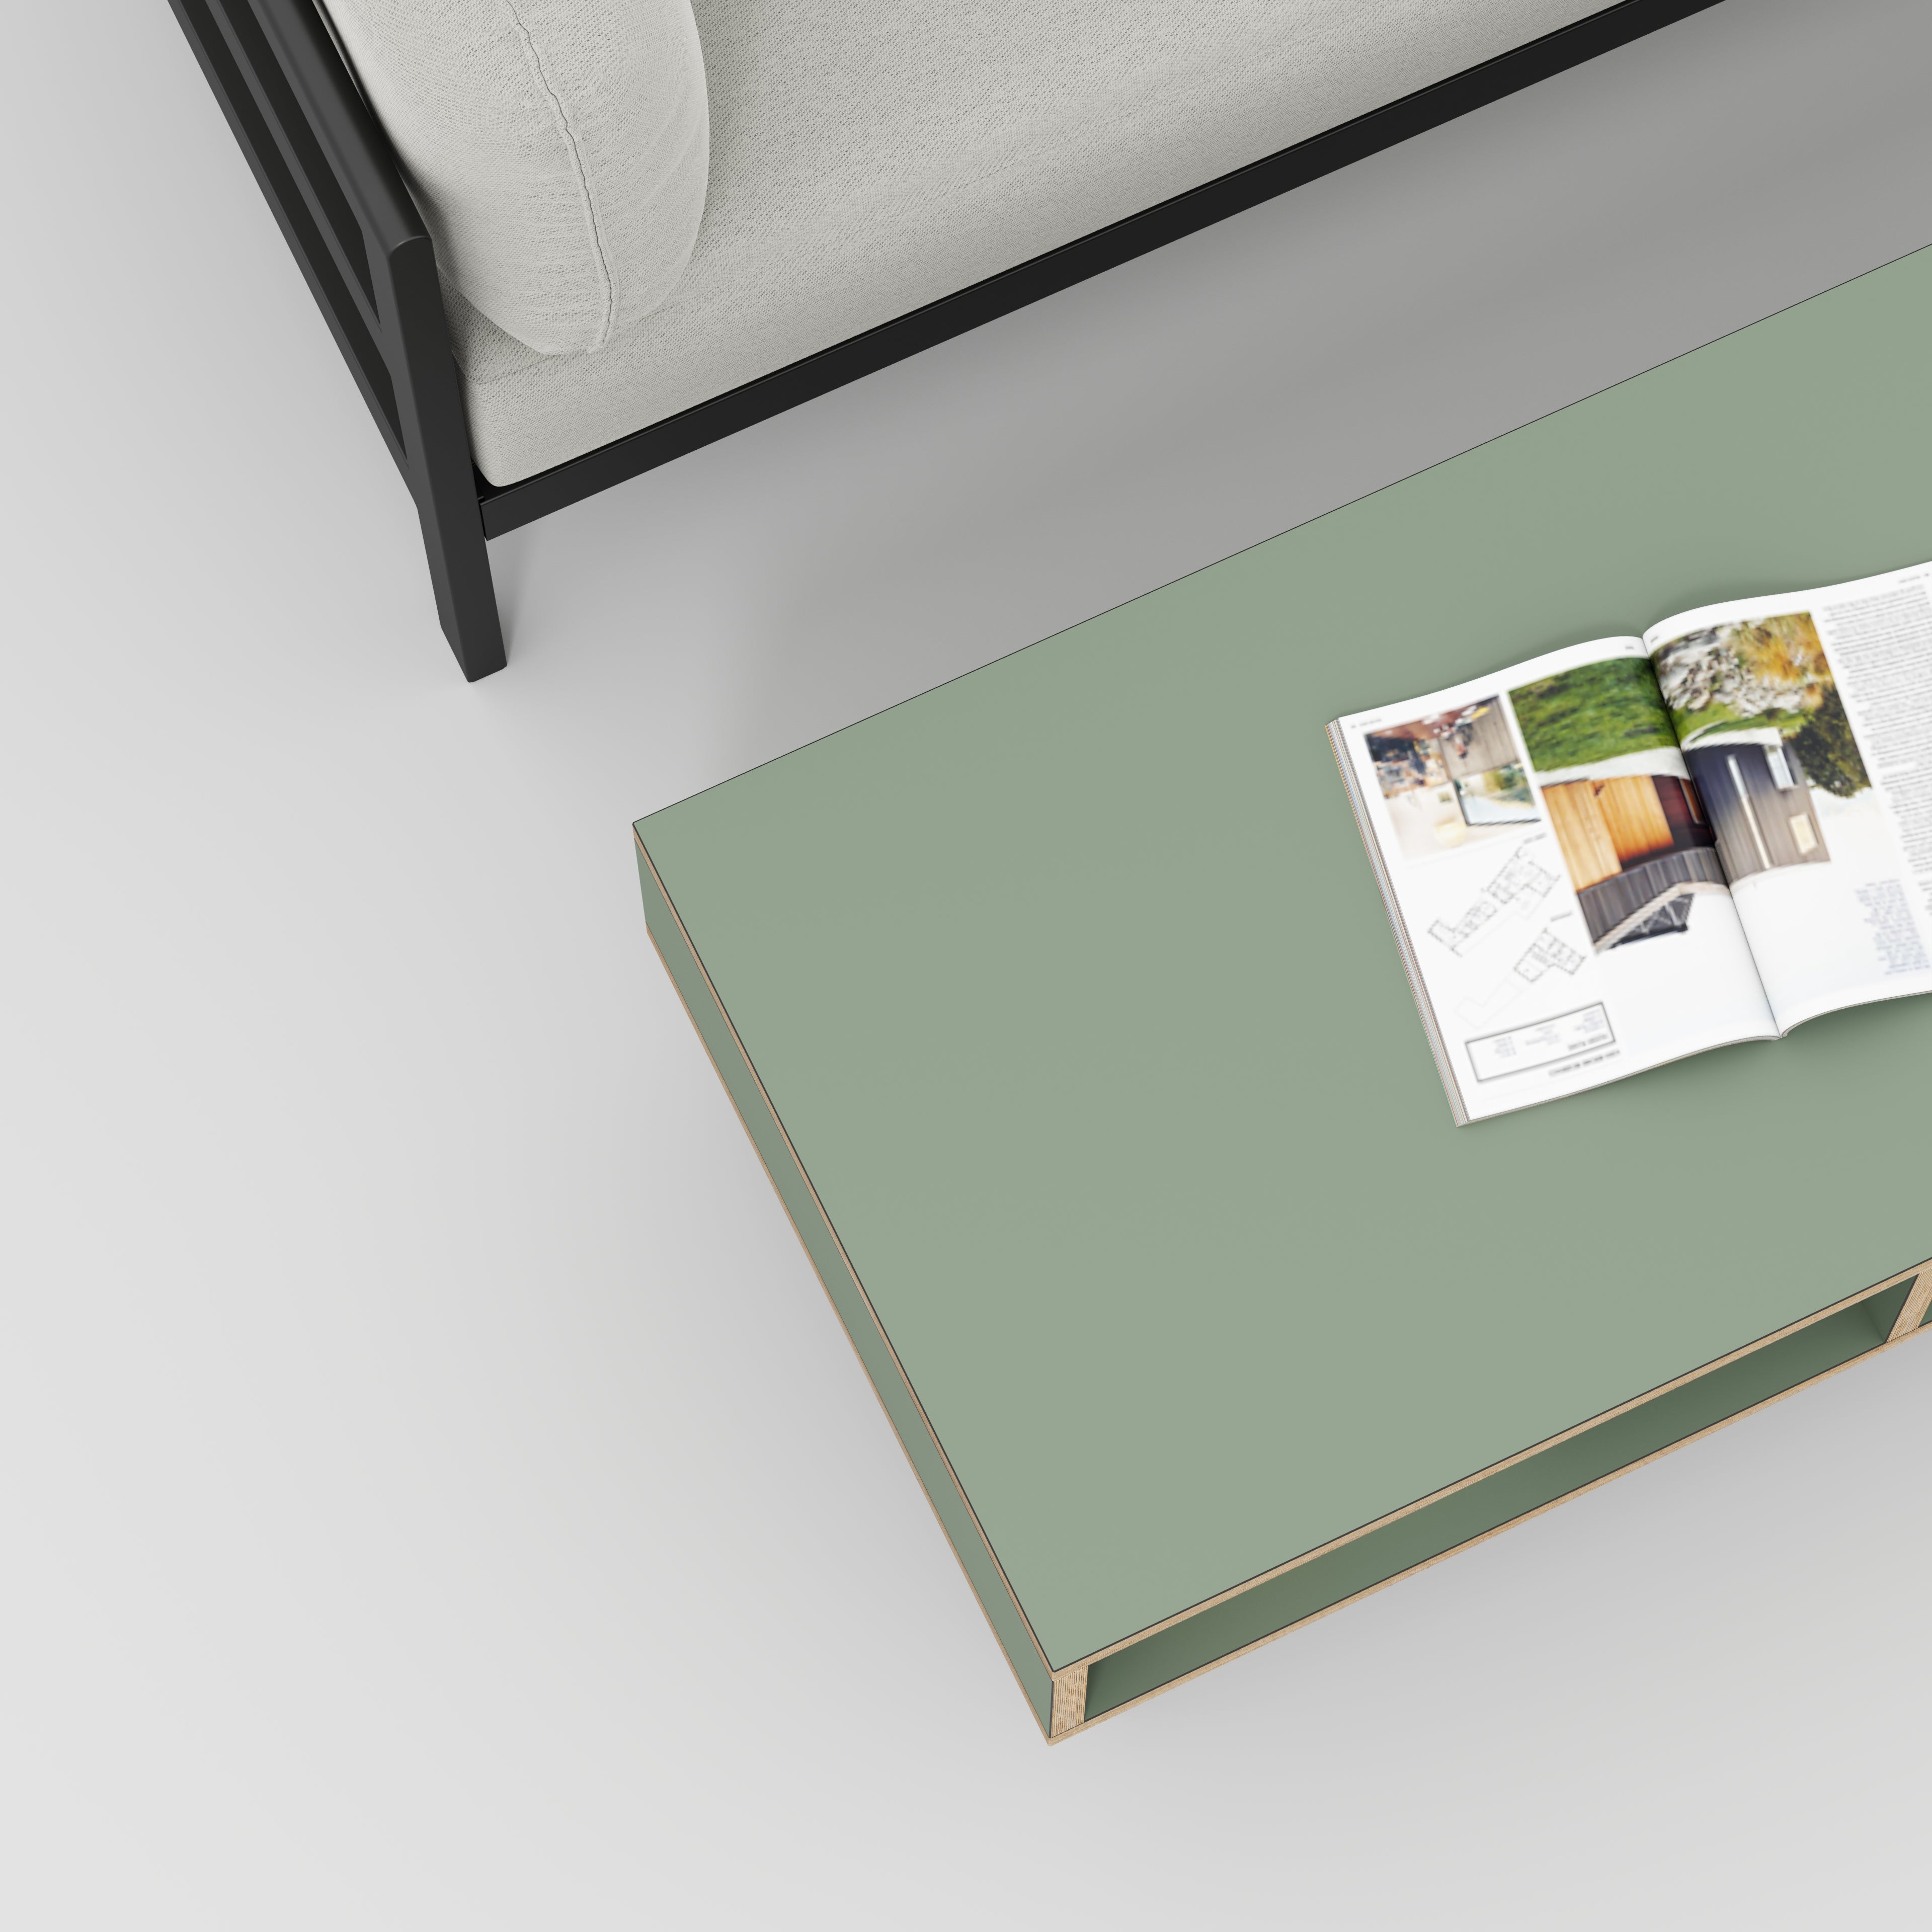 Coffee Table with Box Storage and Black Hairpin Legs - Formica Green Slate - 1200(w) x 600(d) x 400(h)